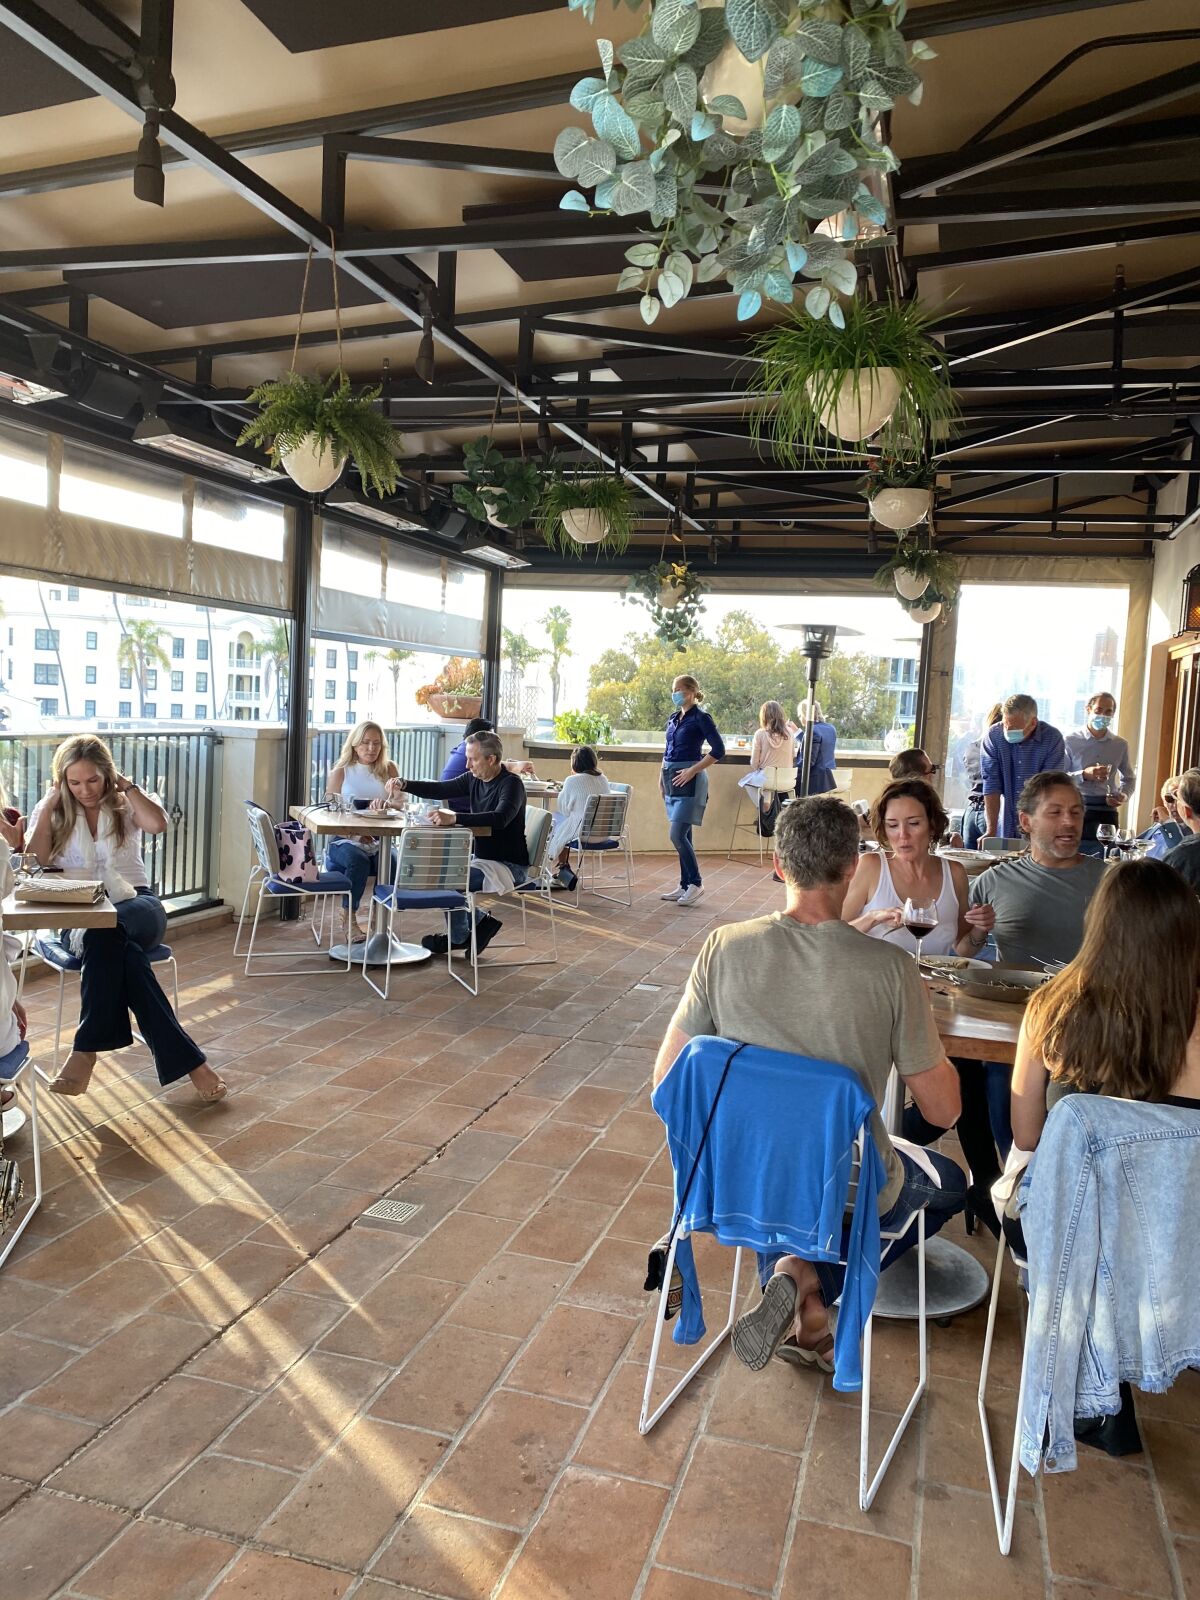 Catania restaurant in La Jolla held a mock reopening of socially distanced dine-in service May 29 and plans to officially reopen Wednesday, June 3.